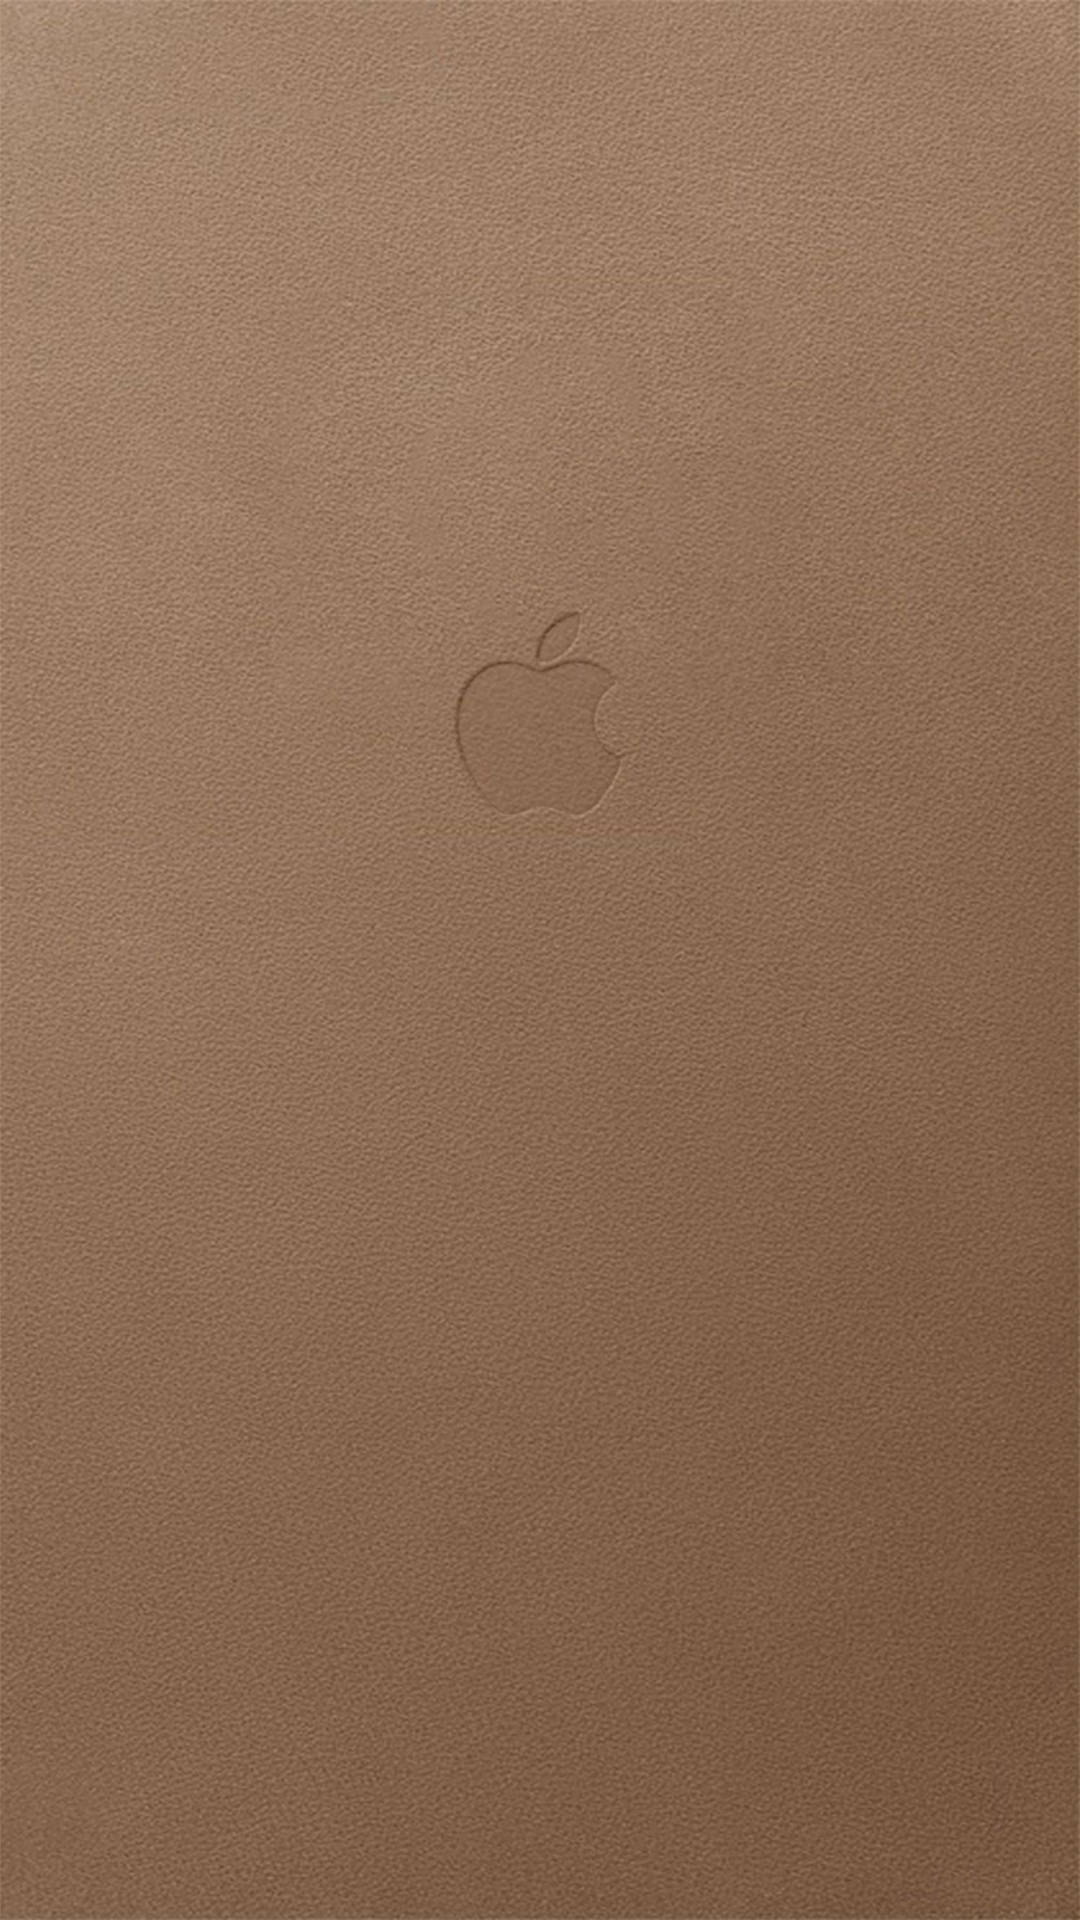 Apple Logo Brown Iphone Background